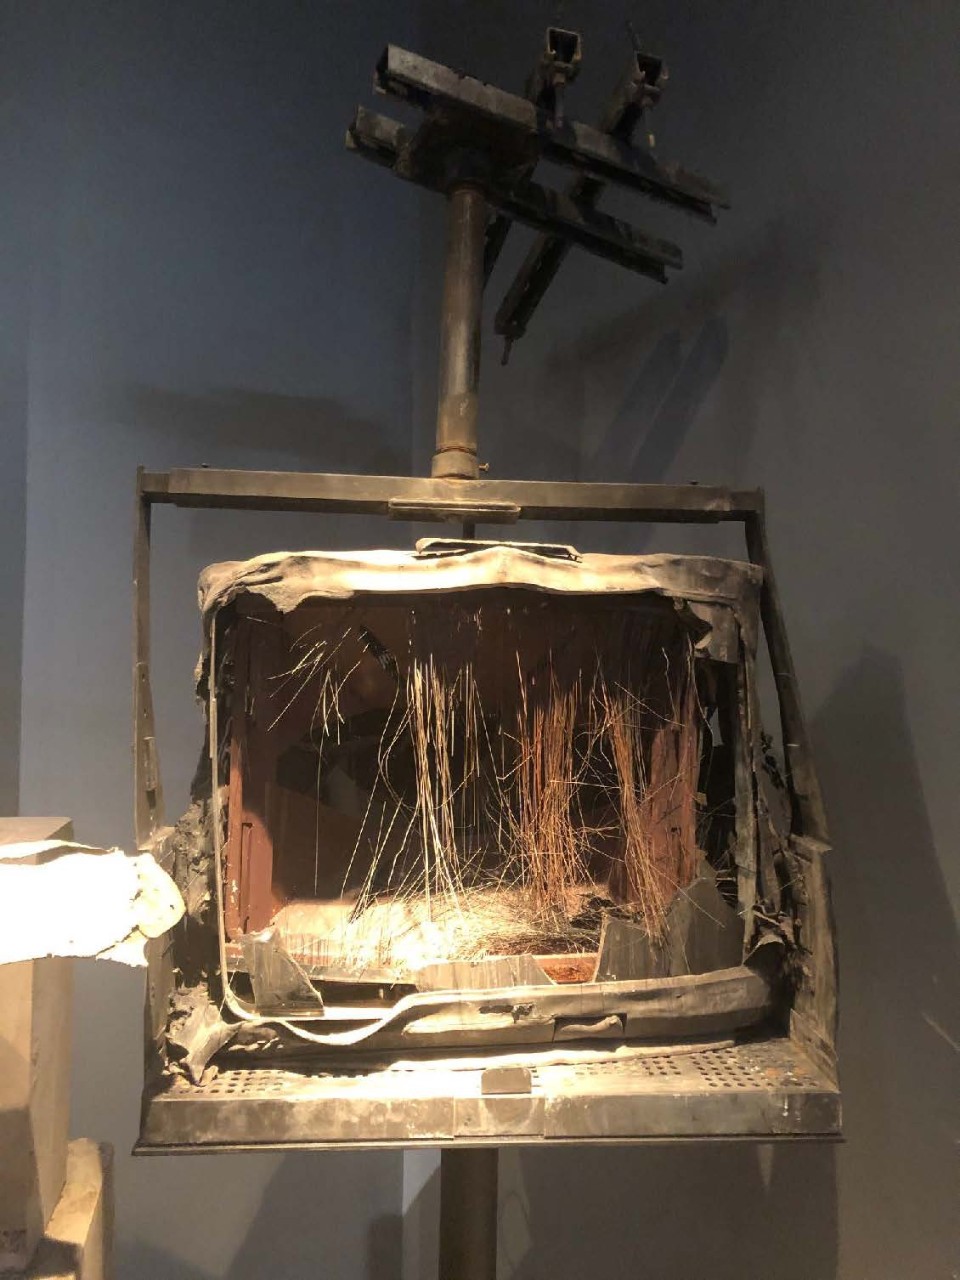 <p>Television on mounted wall/ceiling stand. Front glass broken out. Wires dangling inside. Covered in dust.</p>